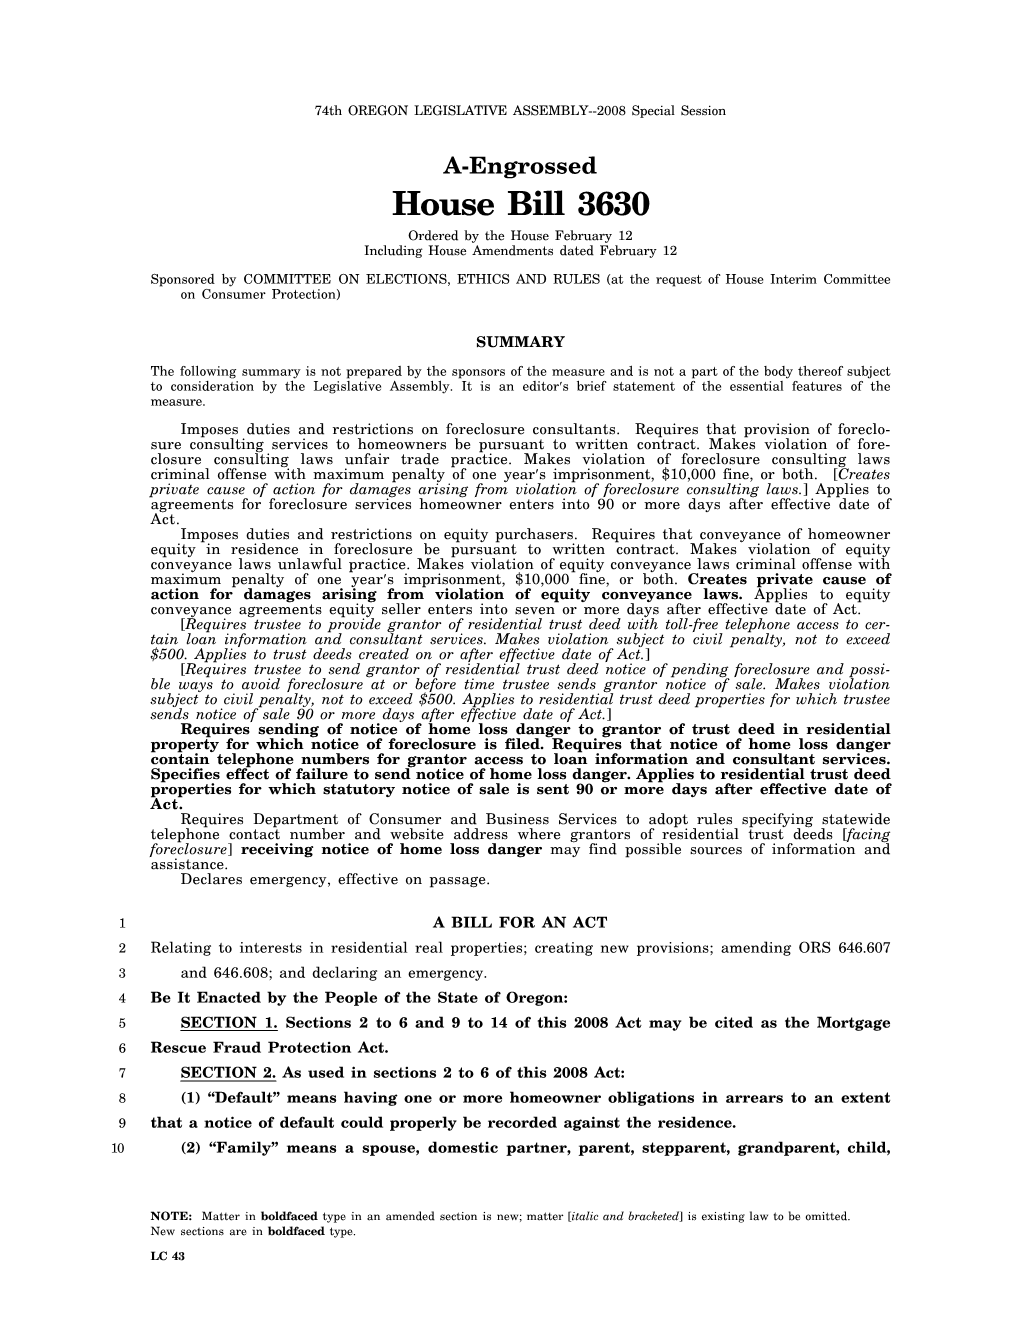 A-Engrossed House Bill 3630 Ordered by the House February 12 Including House Amendments Dated February 12